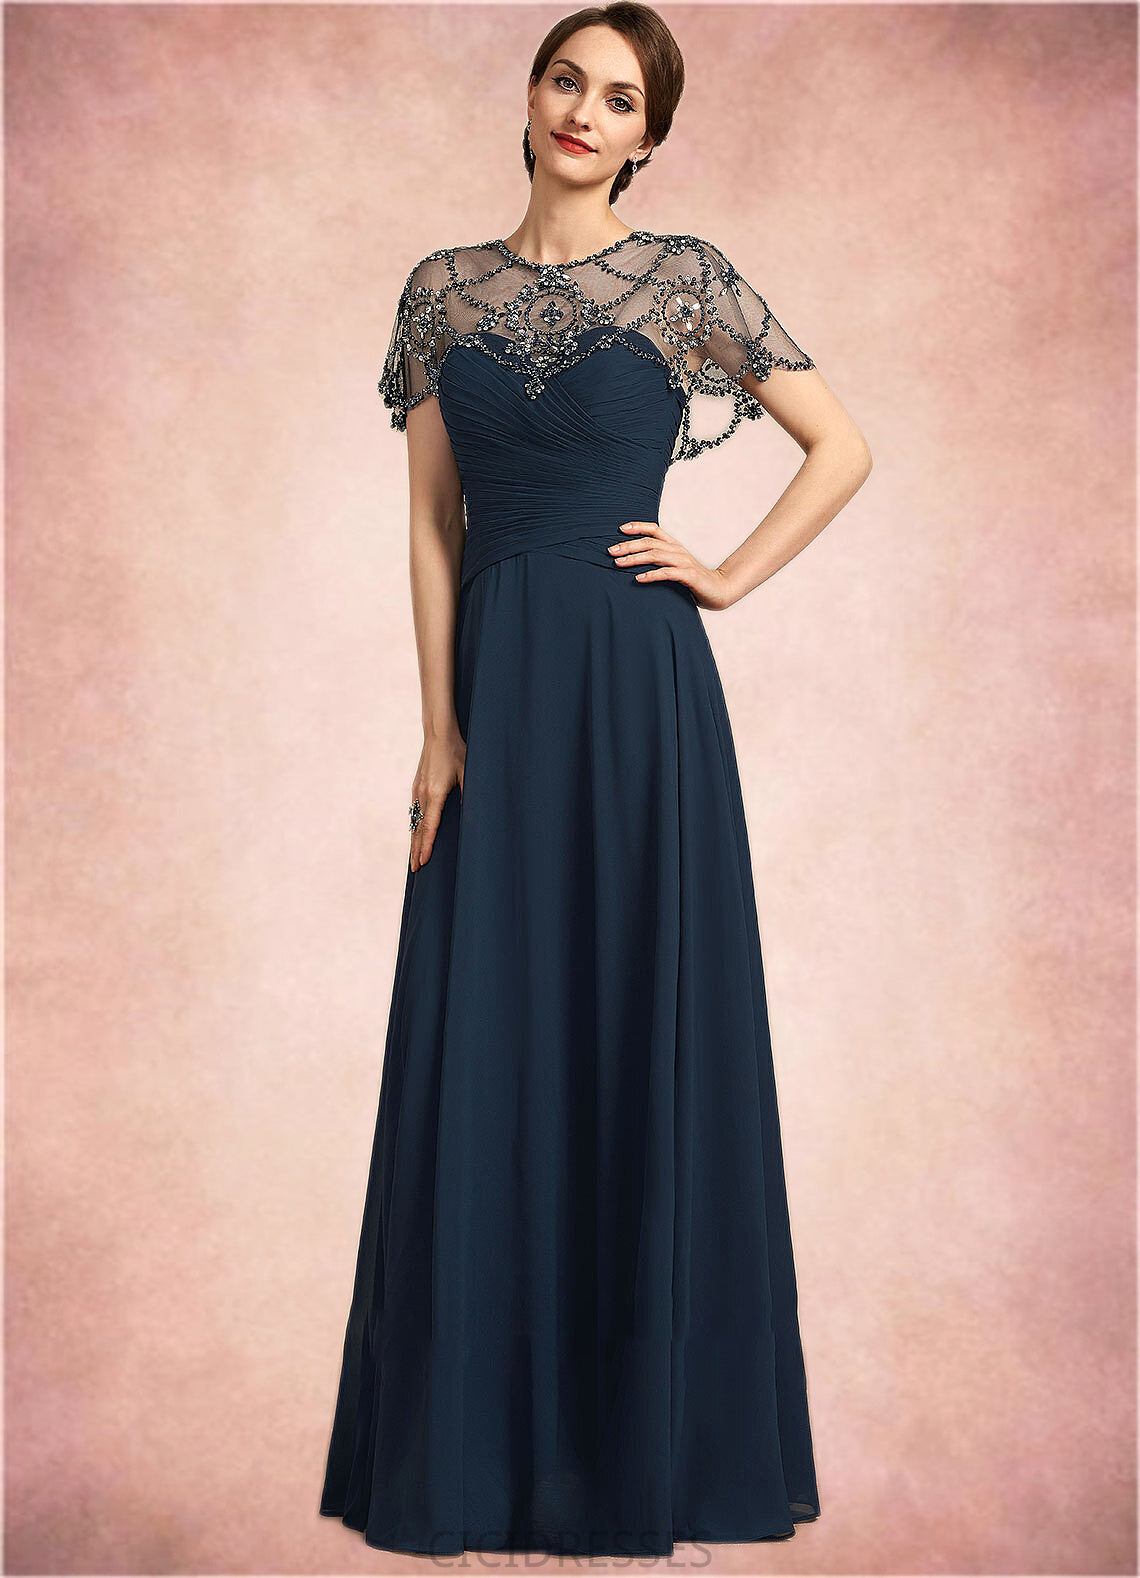 Trudie A-Line Scoop Neck Floor-Length Chiffon Mother of the Bride Dress With Ruffle Beading Sequins CIC8126P0014711